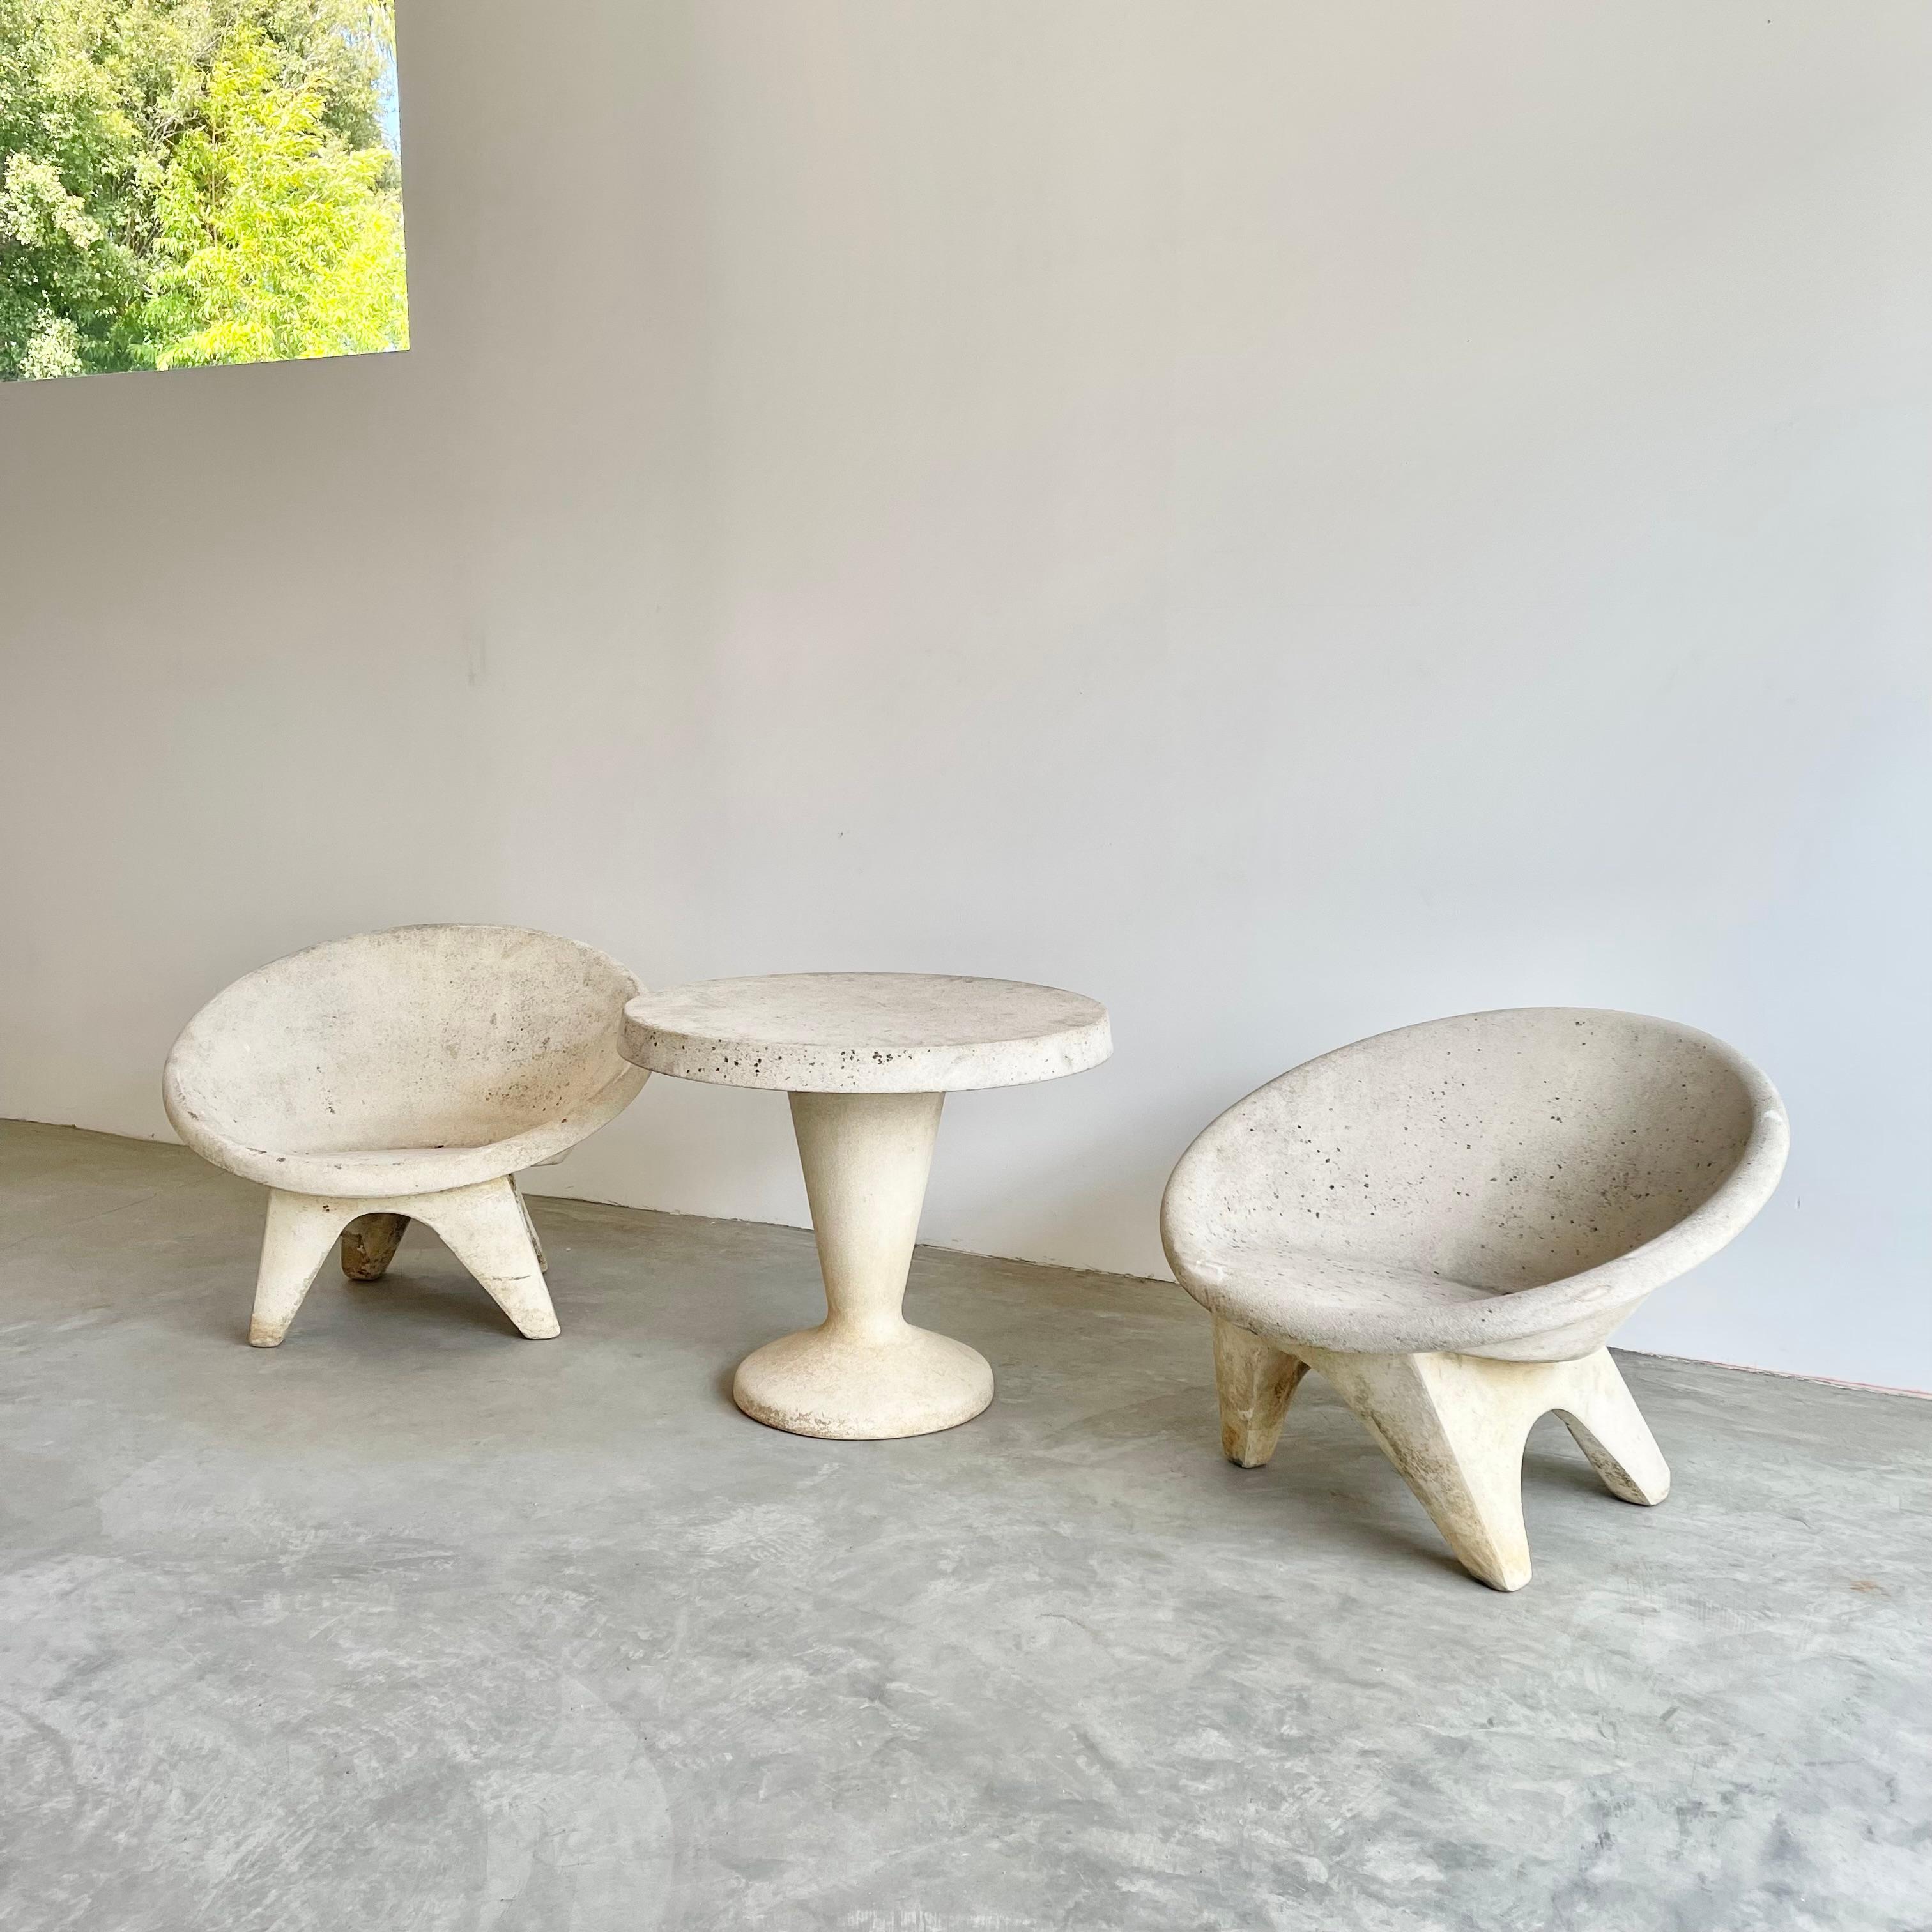 Swiss Sculptural Concrete Chairs and Table, 1960s Switzerland